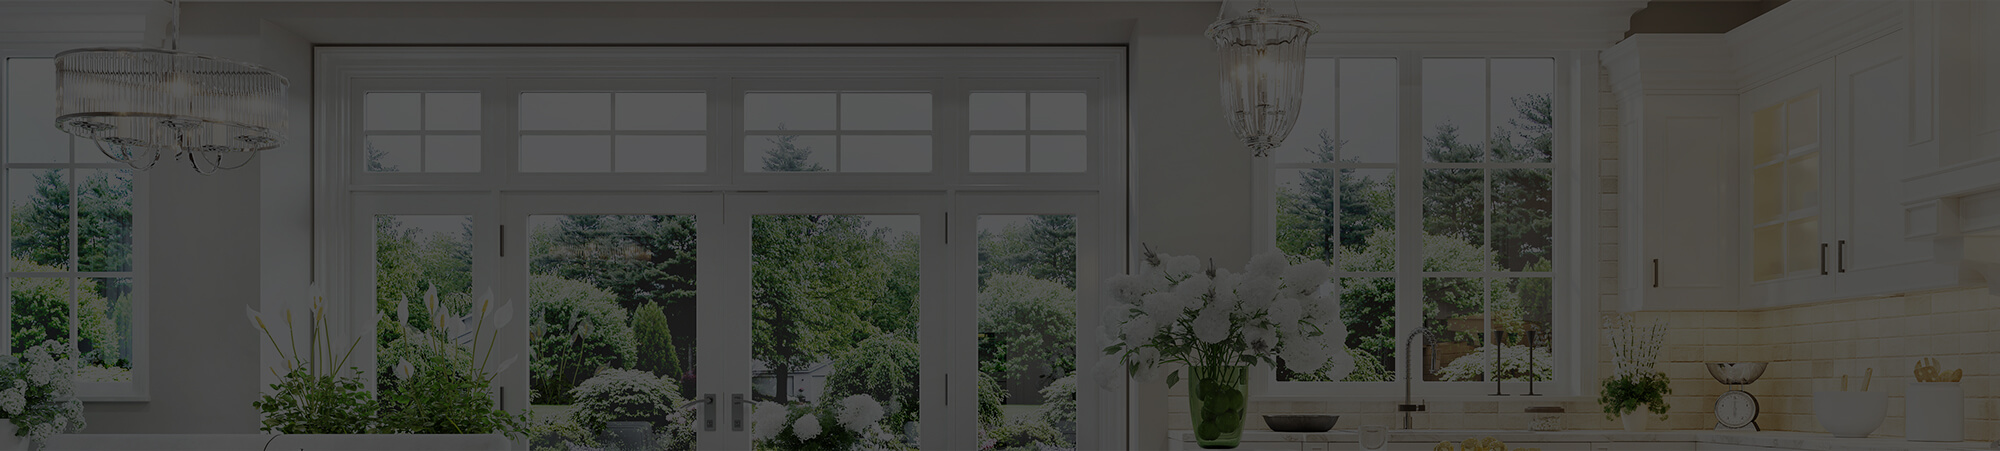 window installation and replacement services in oshkosh